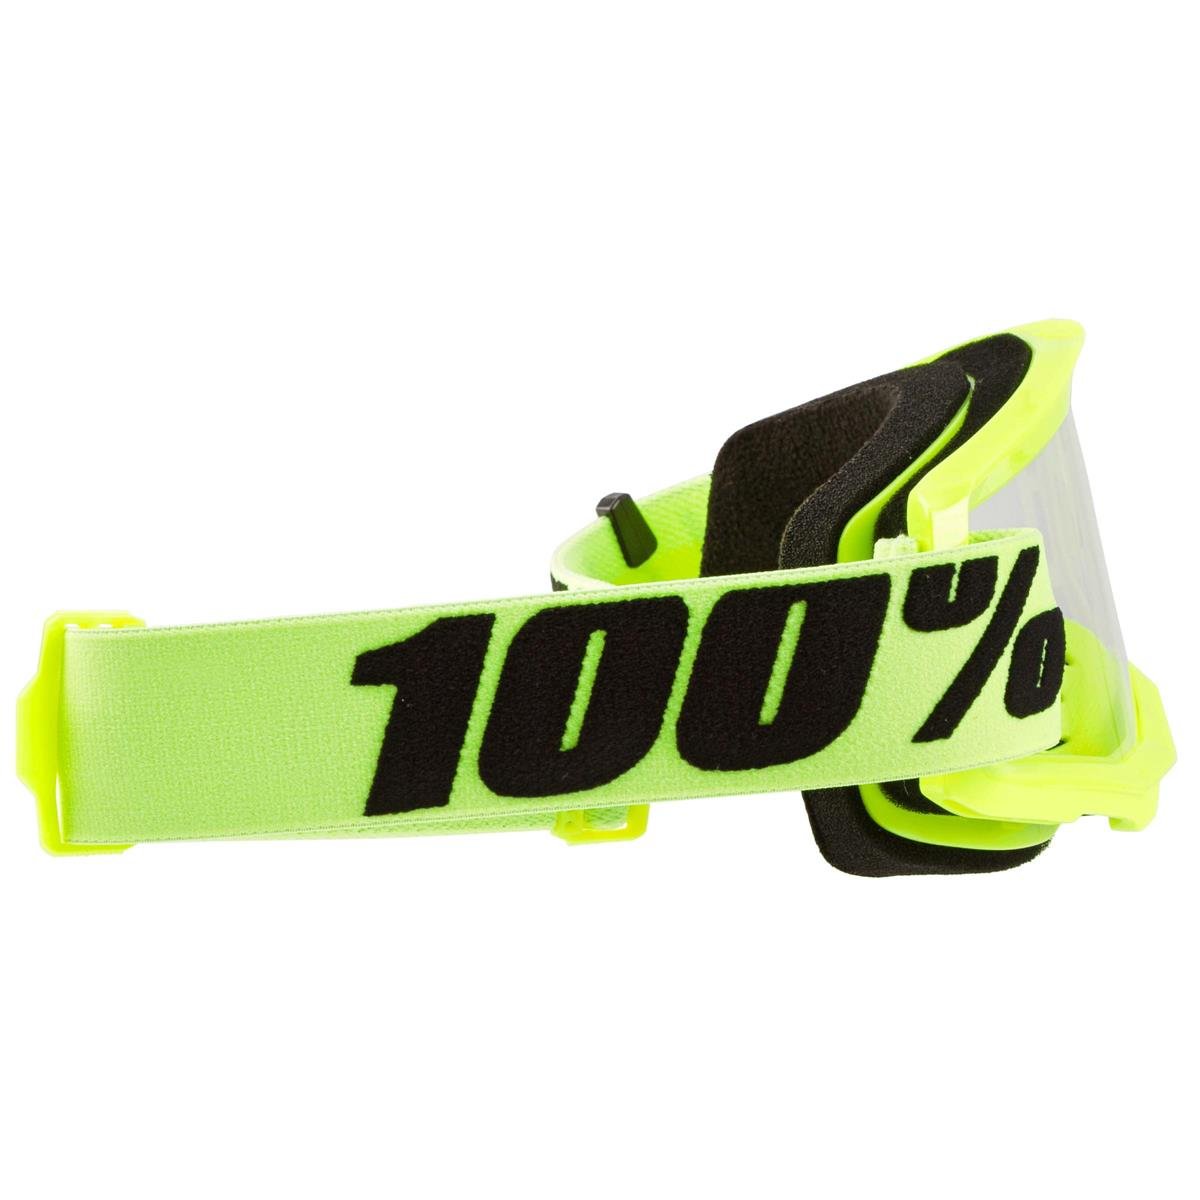 2601-1983 100% Strata Goggles Neon Yellow, Clear Lens 